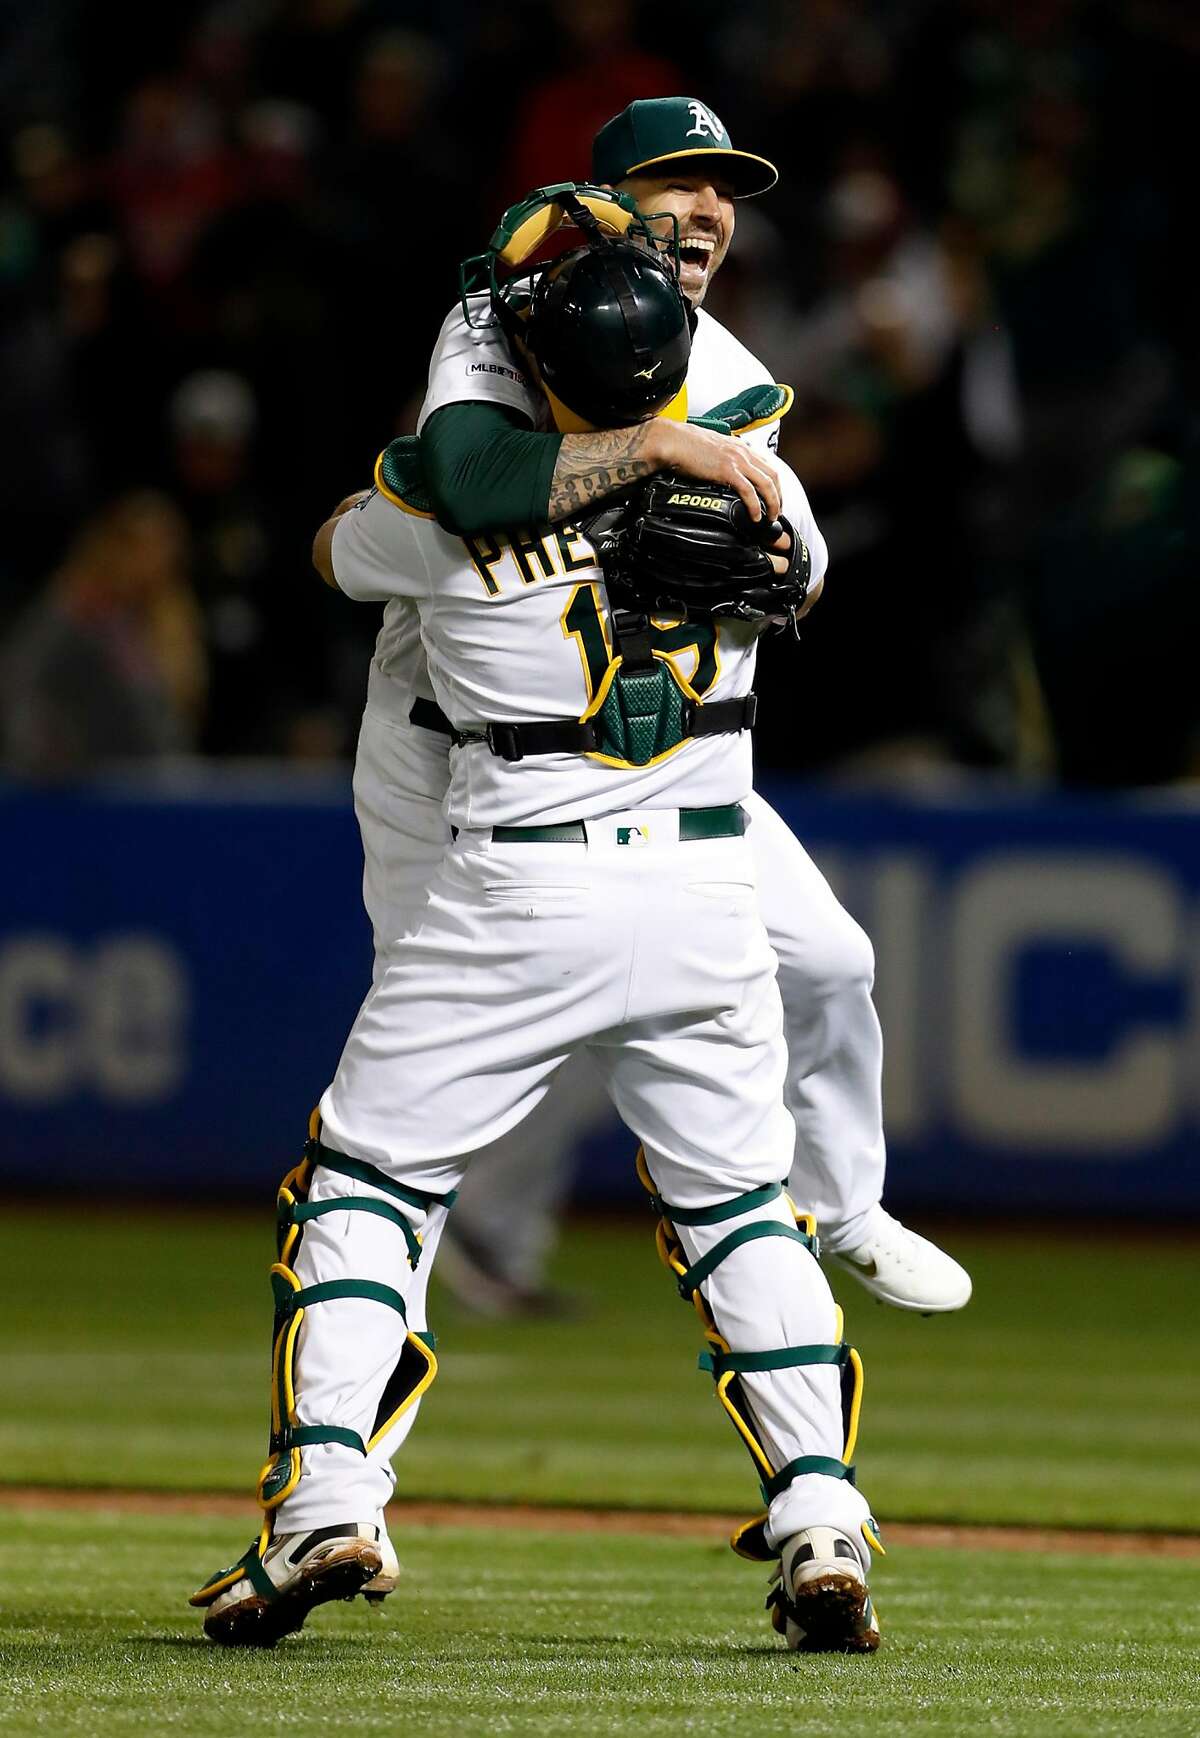 Oakland Athletics' Mike Fiers celebrates no-hitter against Cincinnati Reds during MLB game at Oakland Coliseum in Oakland, Calif., on Tuesday, May 7, 2019.